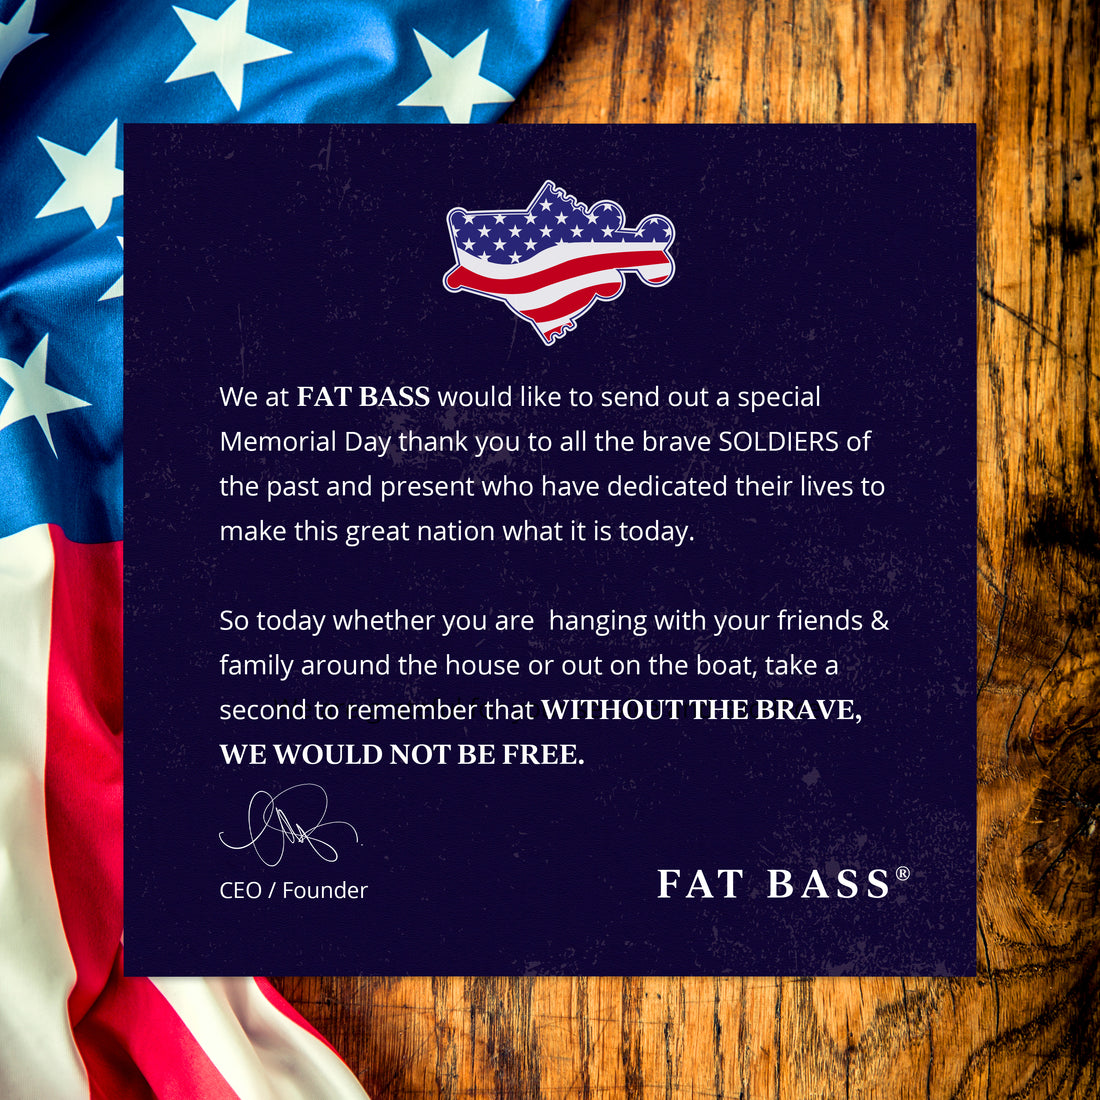 FAT BASS would like to thank you